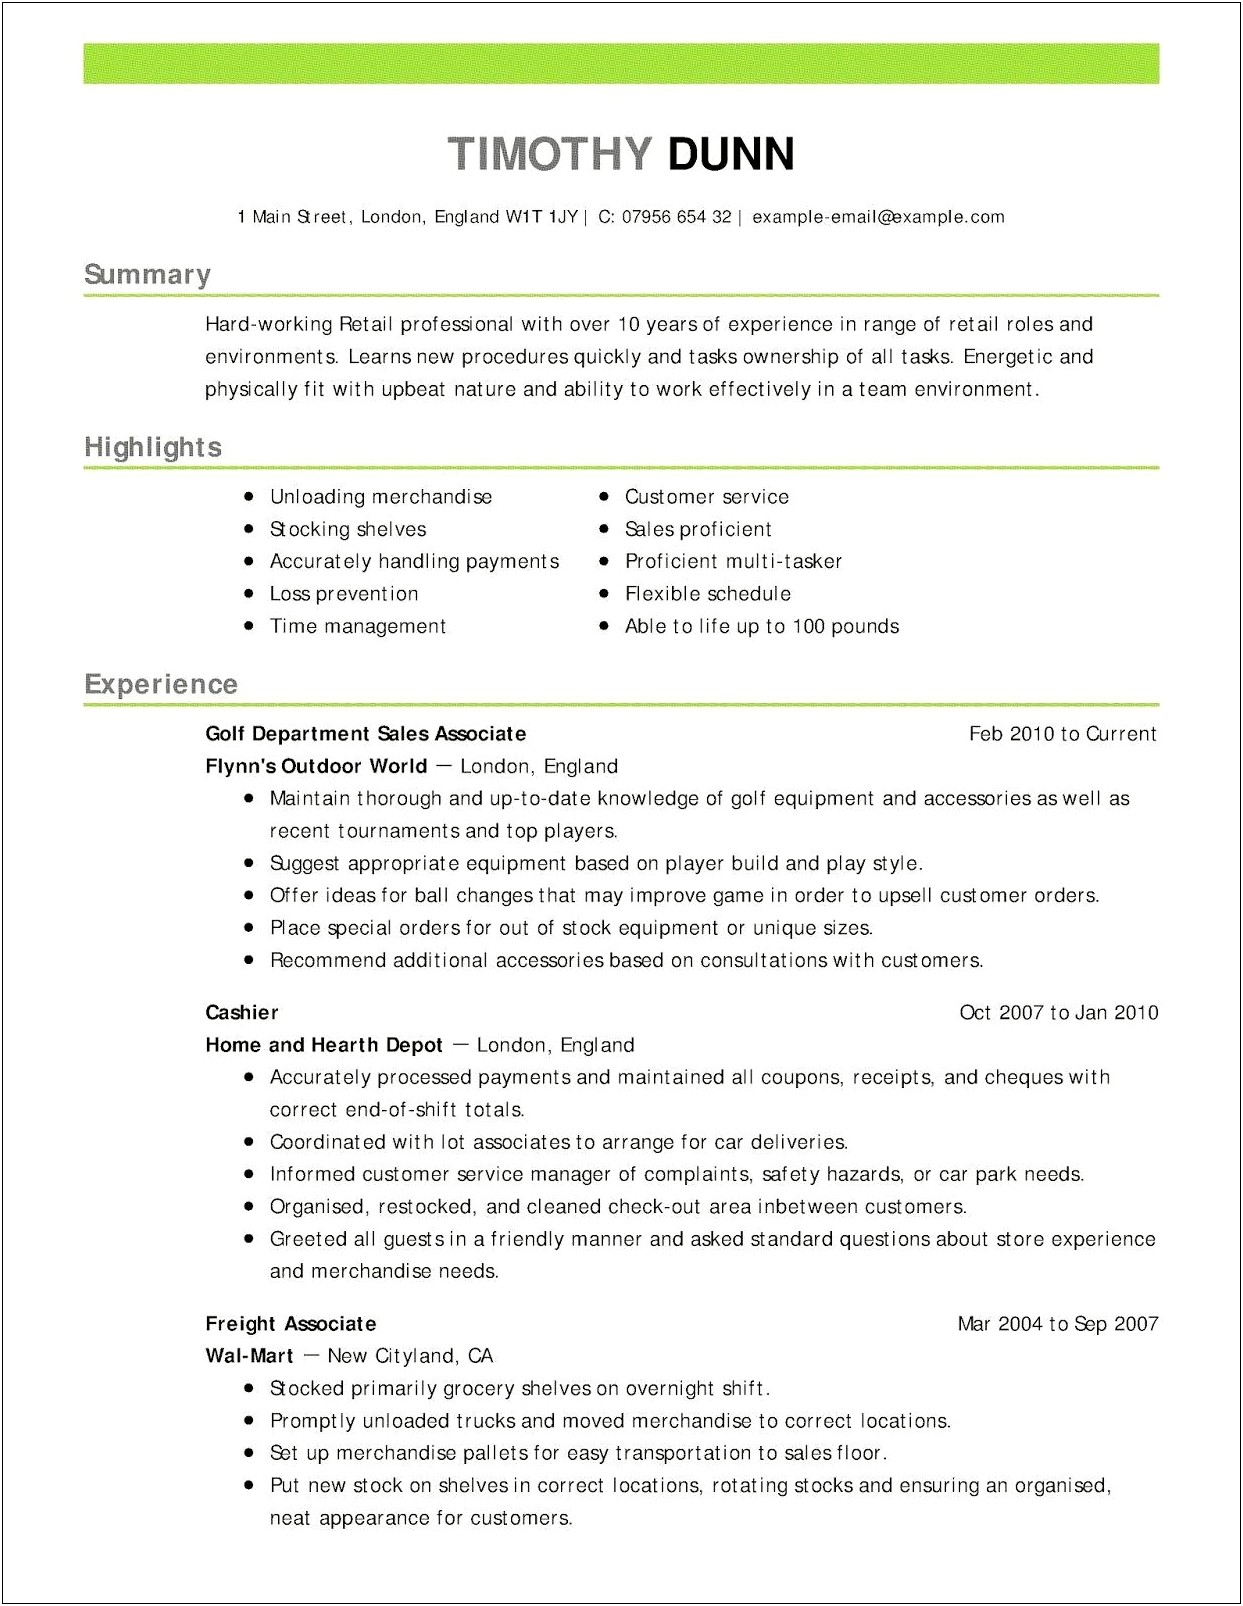 Free Resume Templates For Restaurant Manager